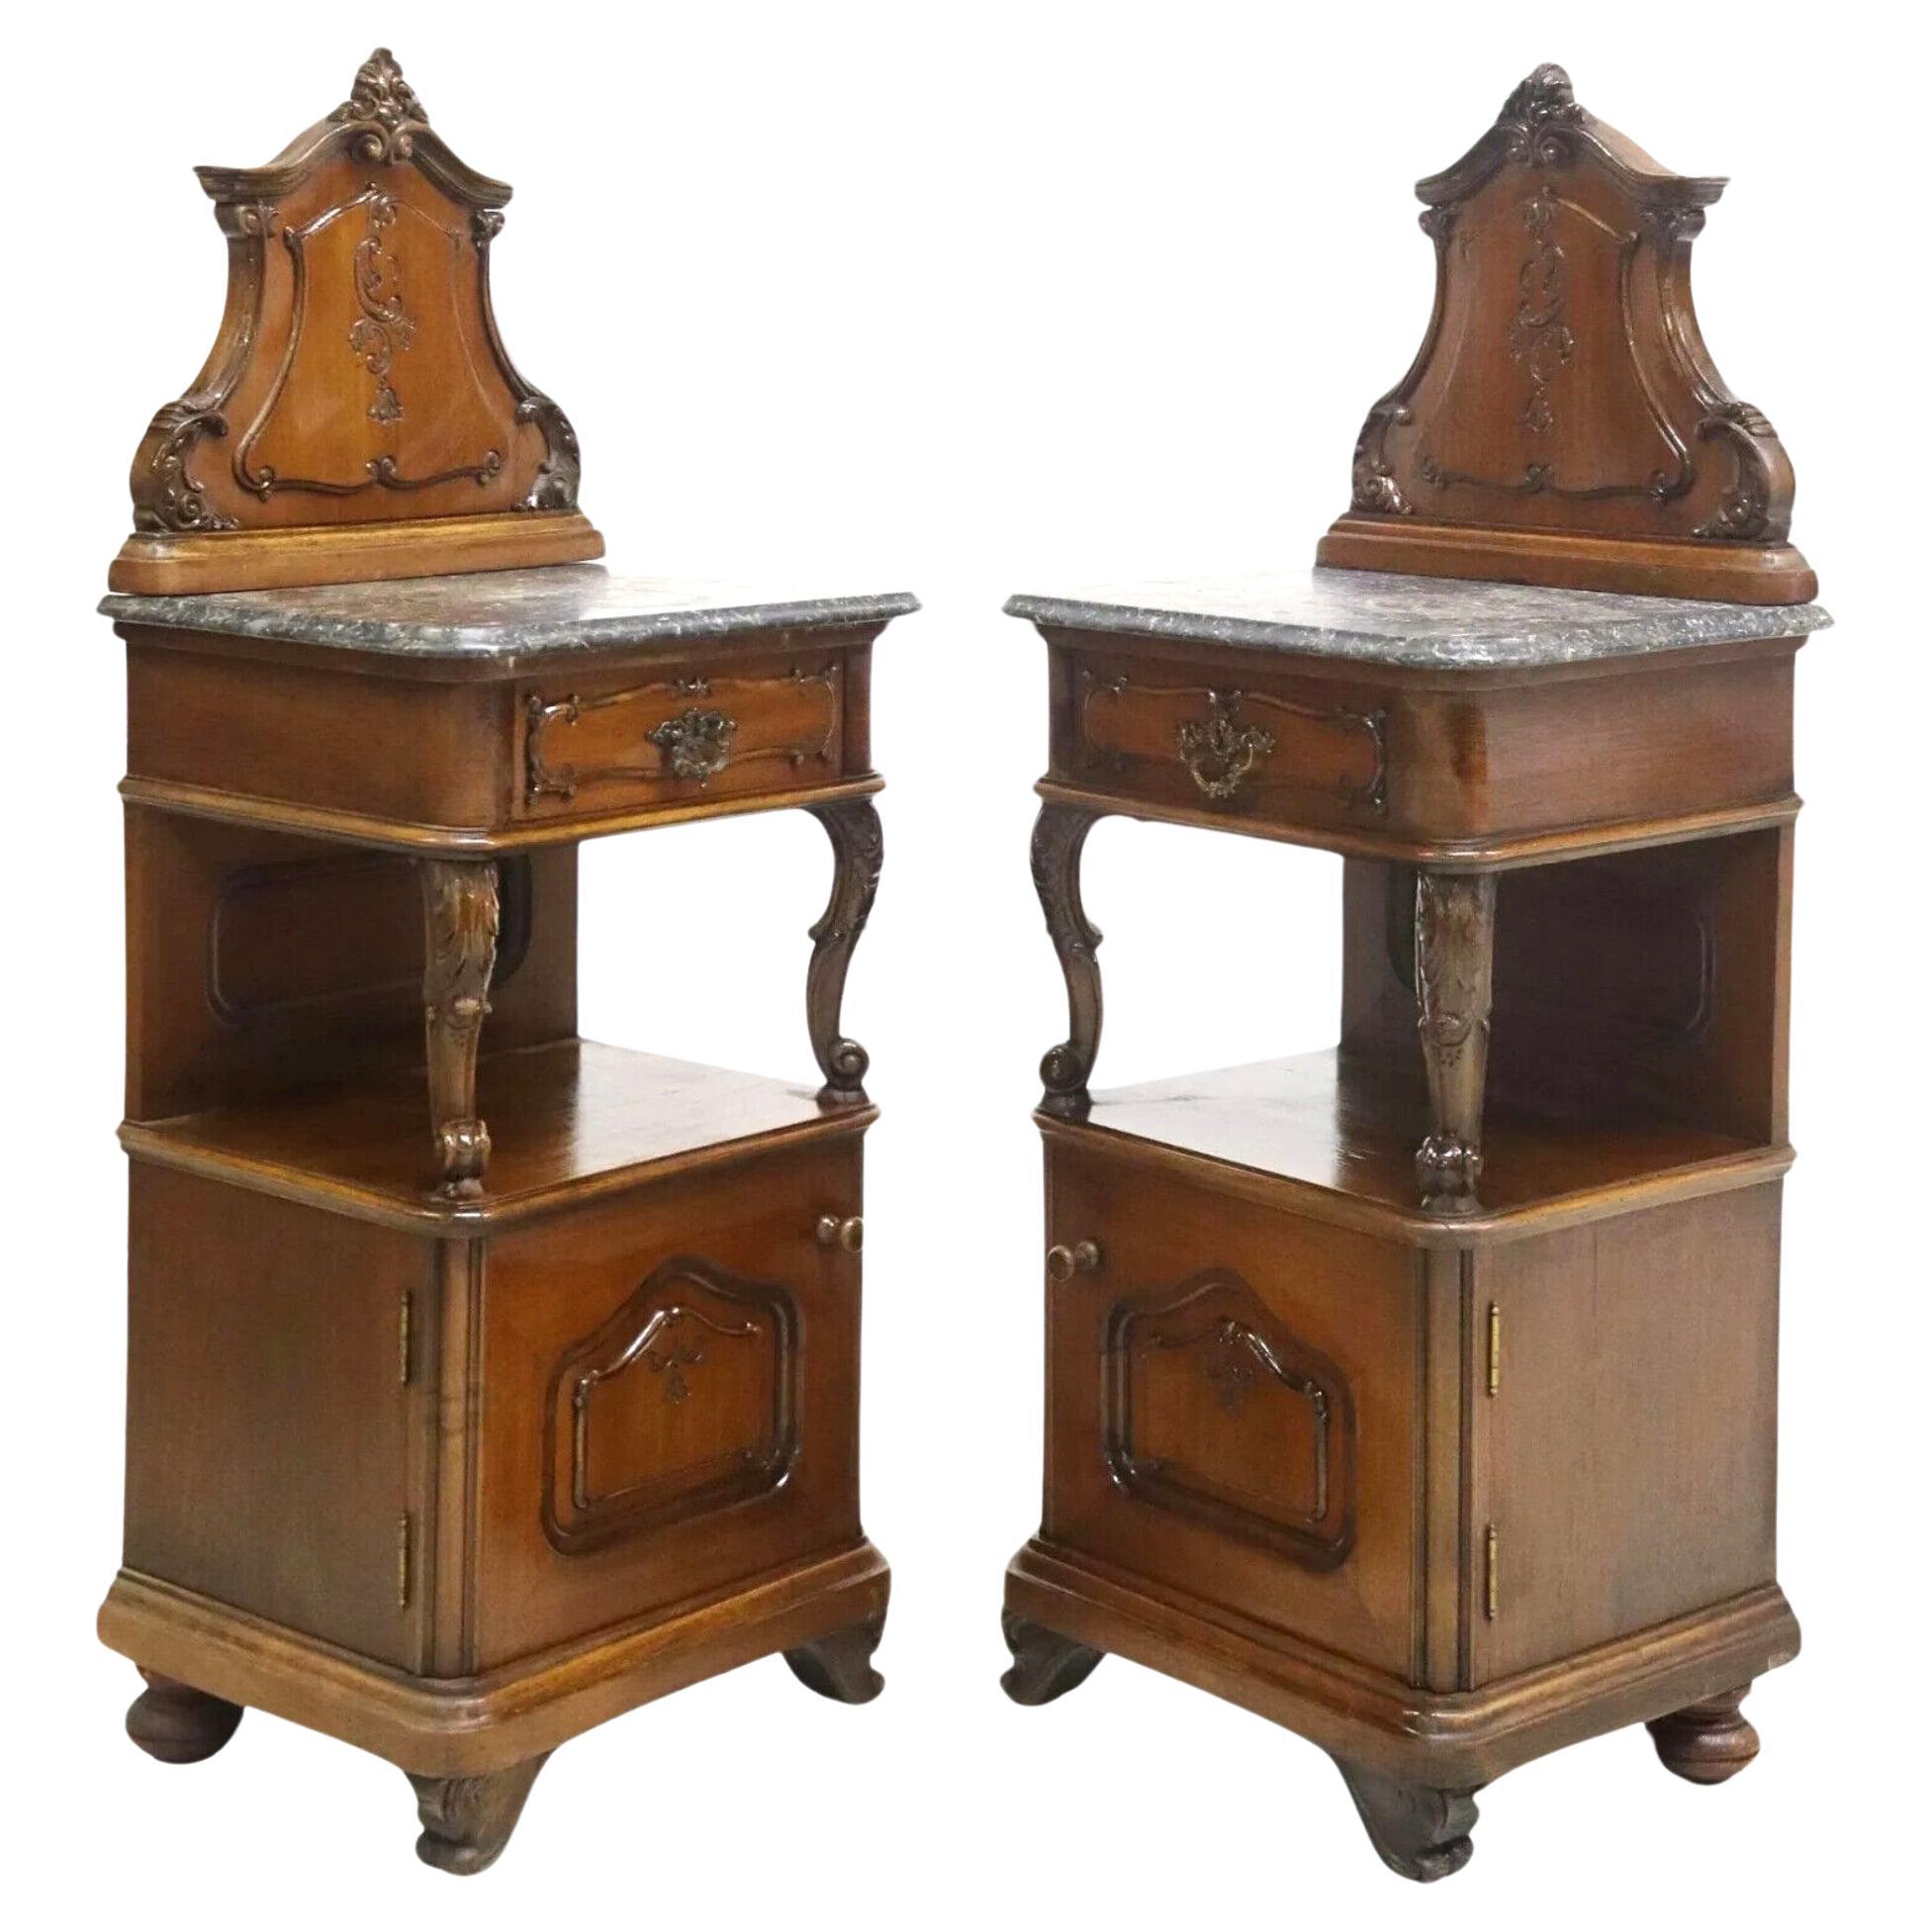 1800's Antique Rococo Style, Marble-Top, Mahogany, Foliat, NIghtstands, Set of 2